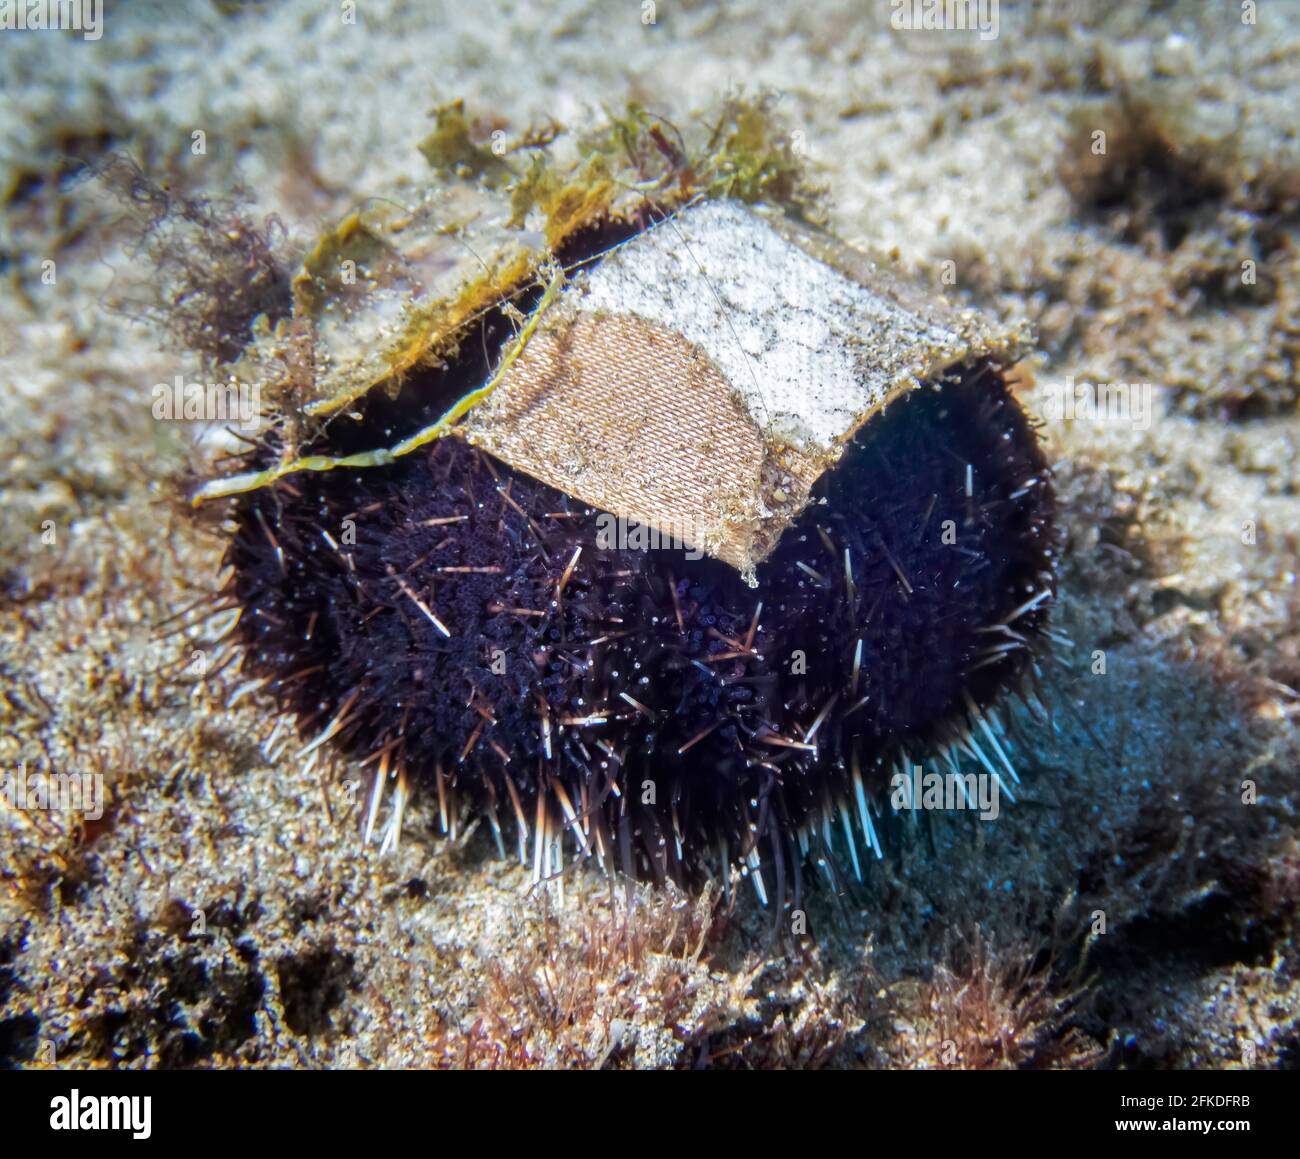 Collector sea urchin underwater has added a used bandage to the collection on its shell underwater in Hawaii. Stock Photo